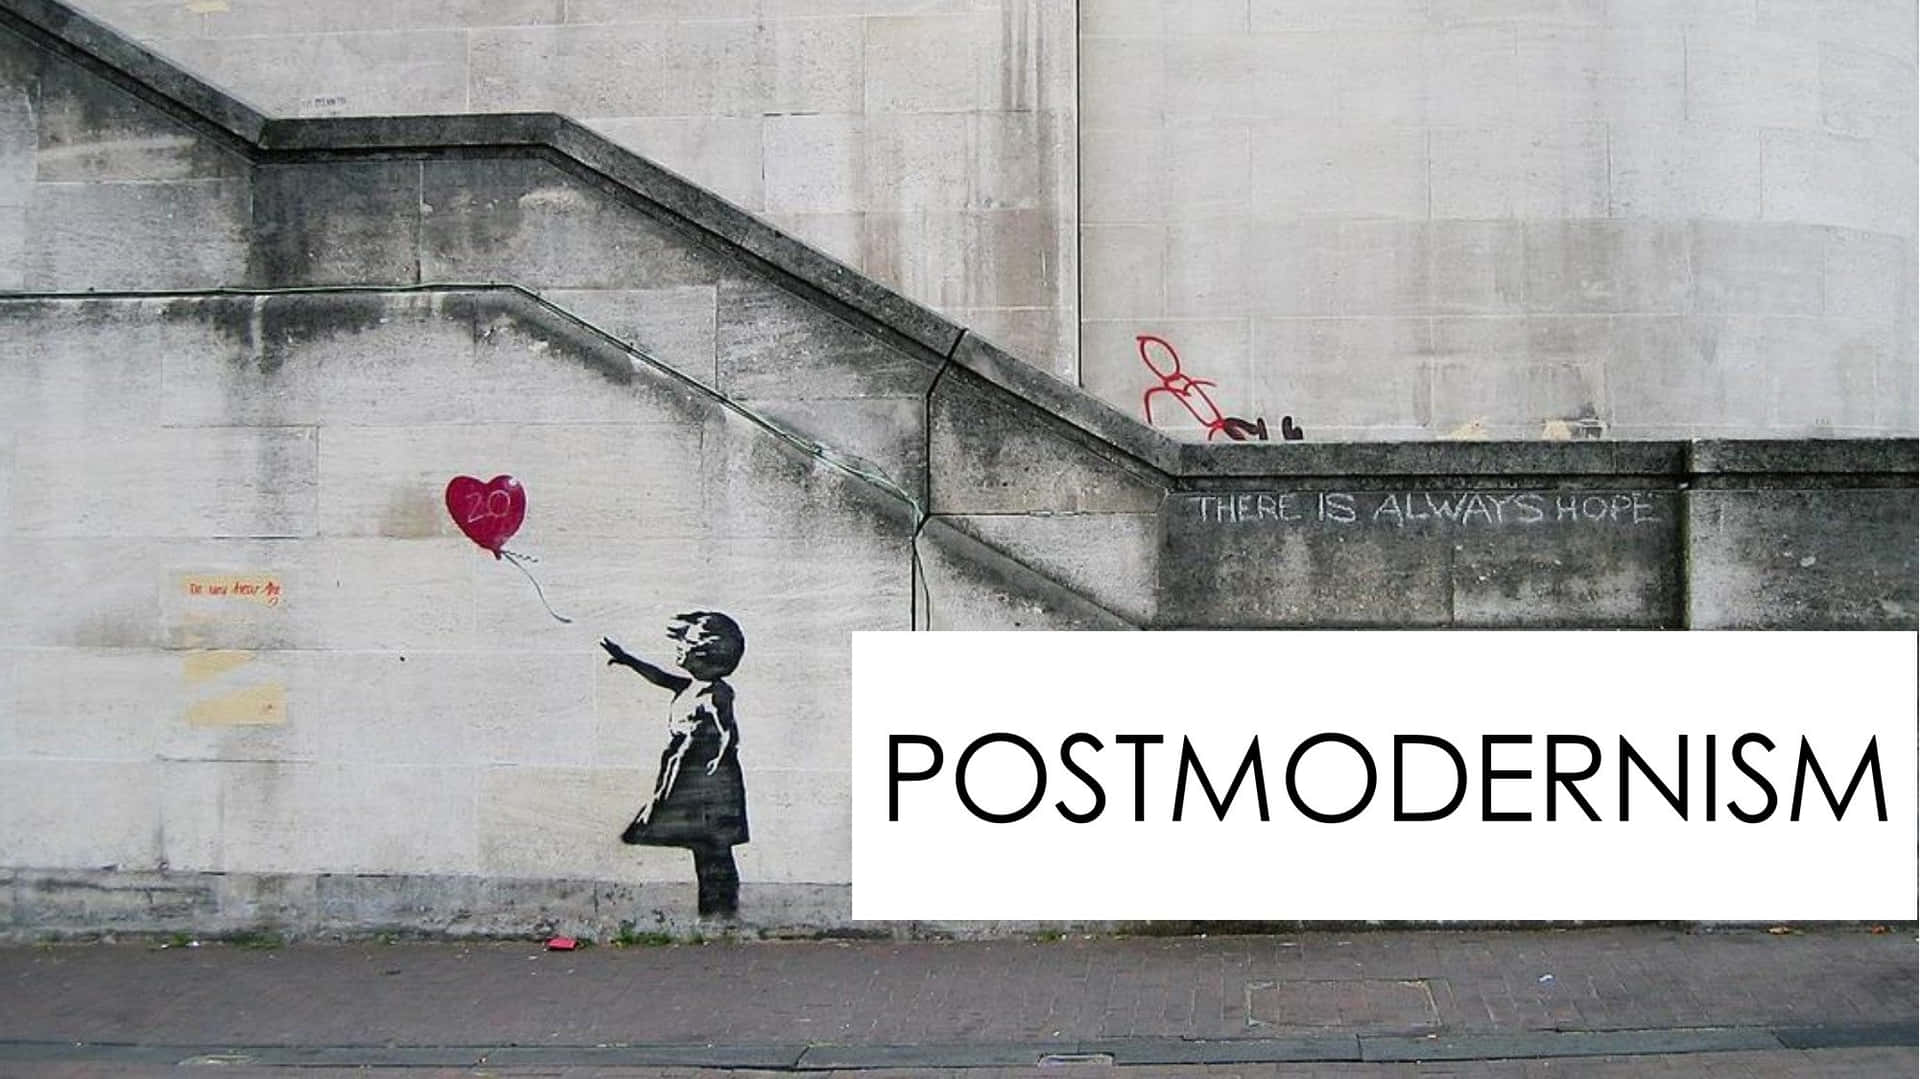 The ever-evolving state of expression that is Postmodernism. Wallpaper